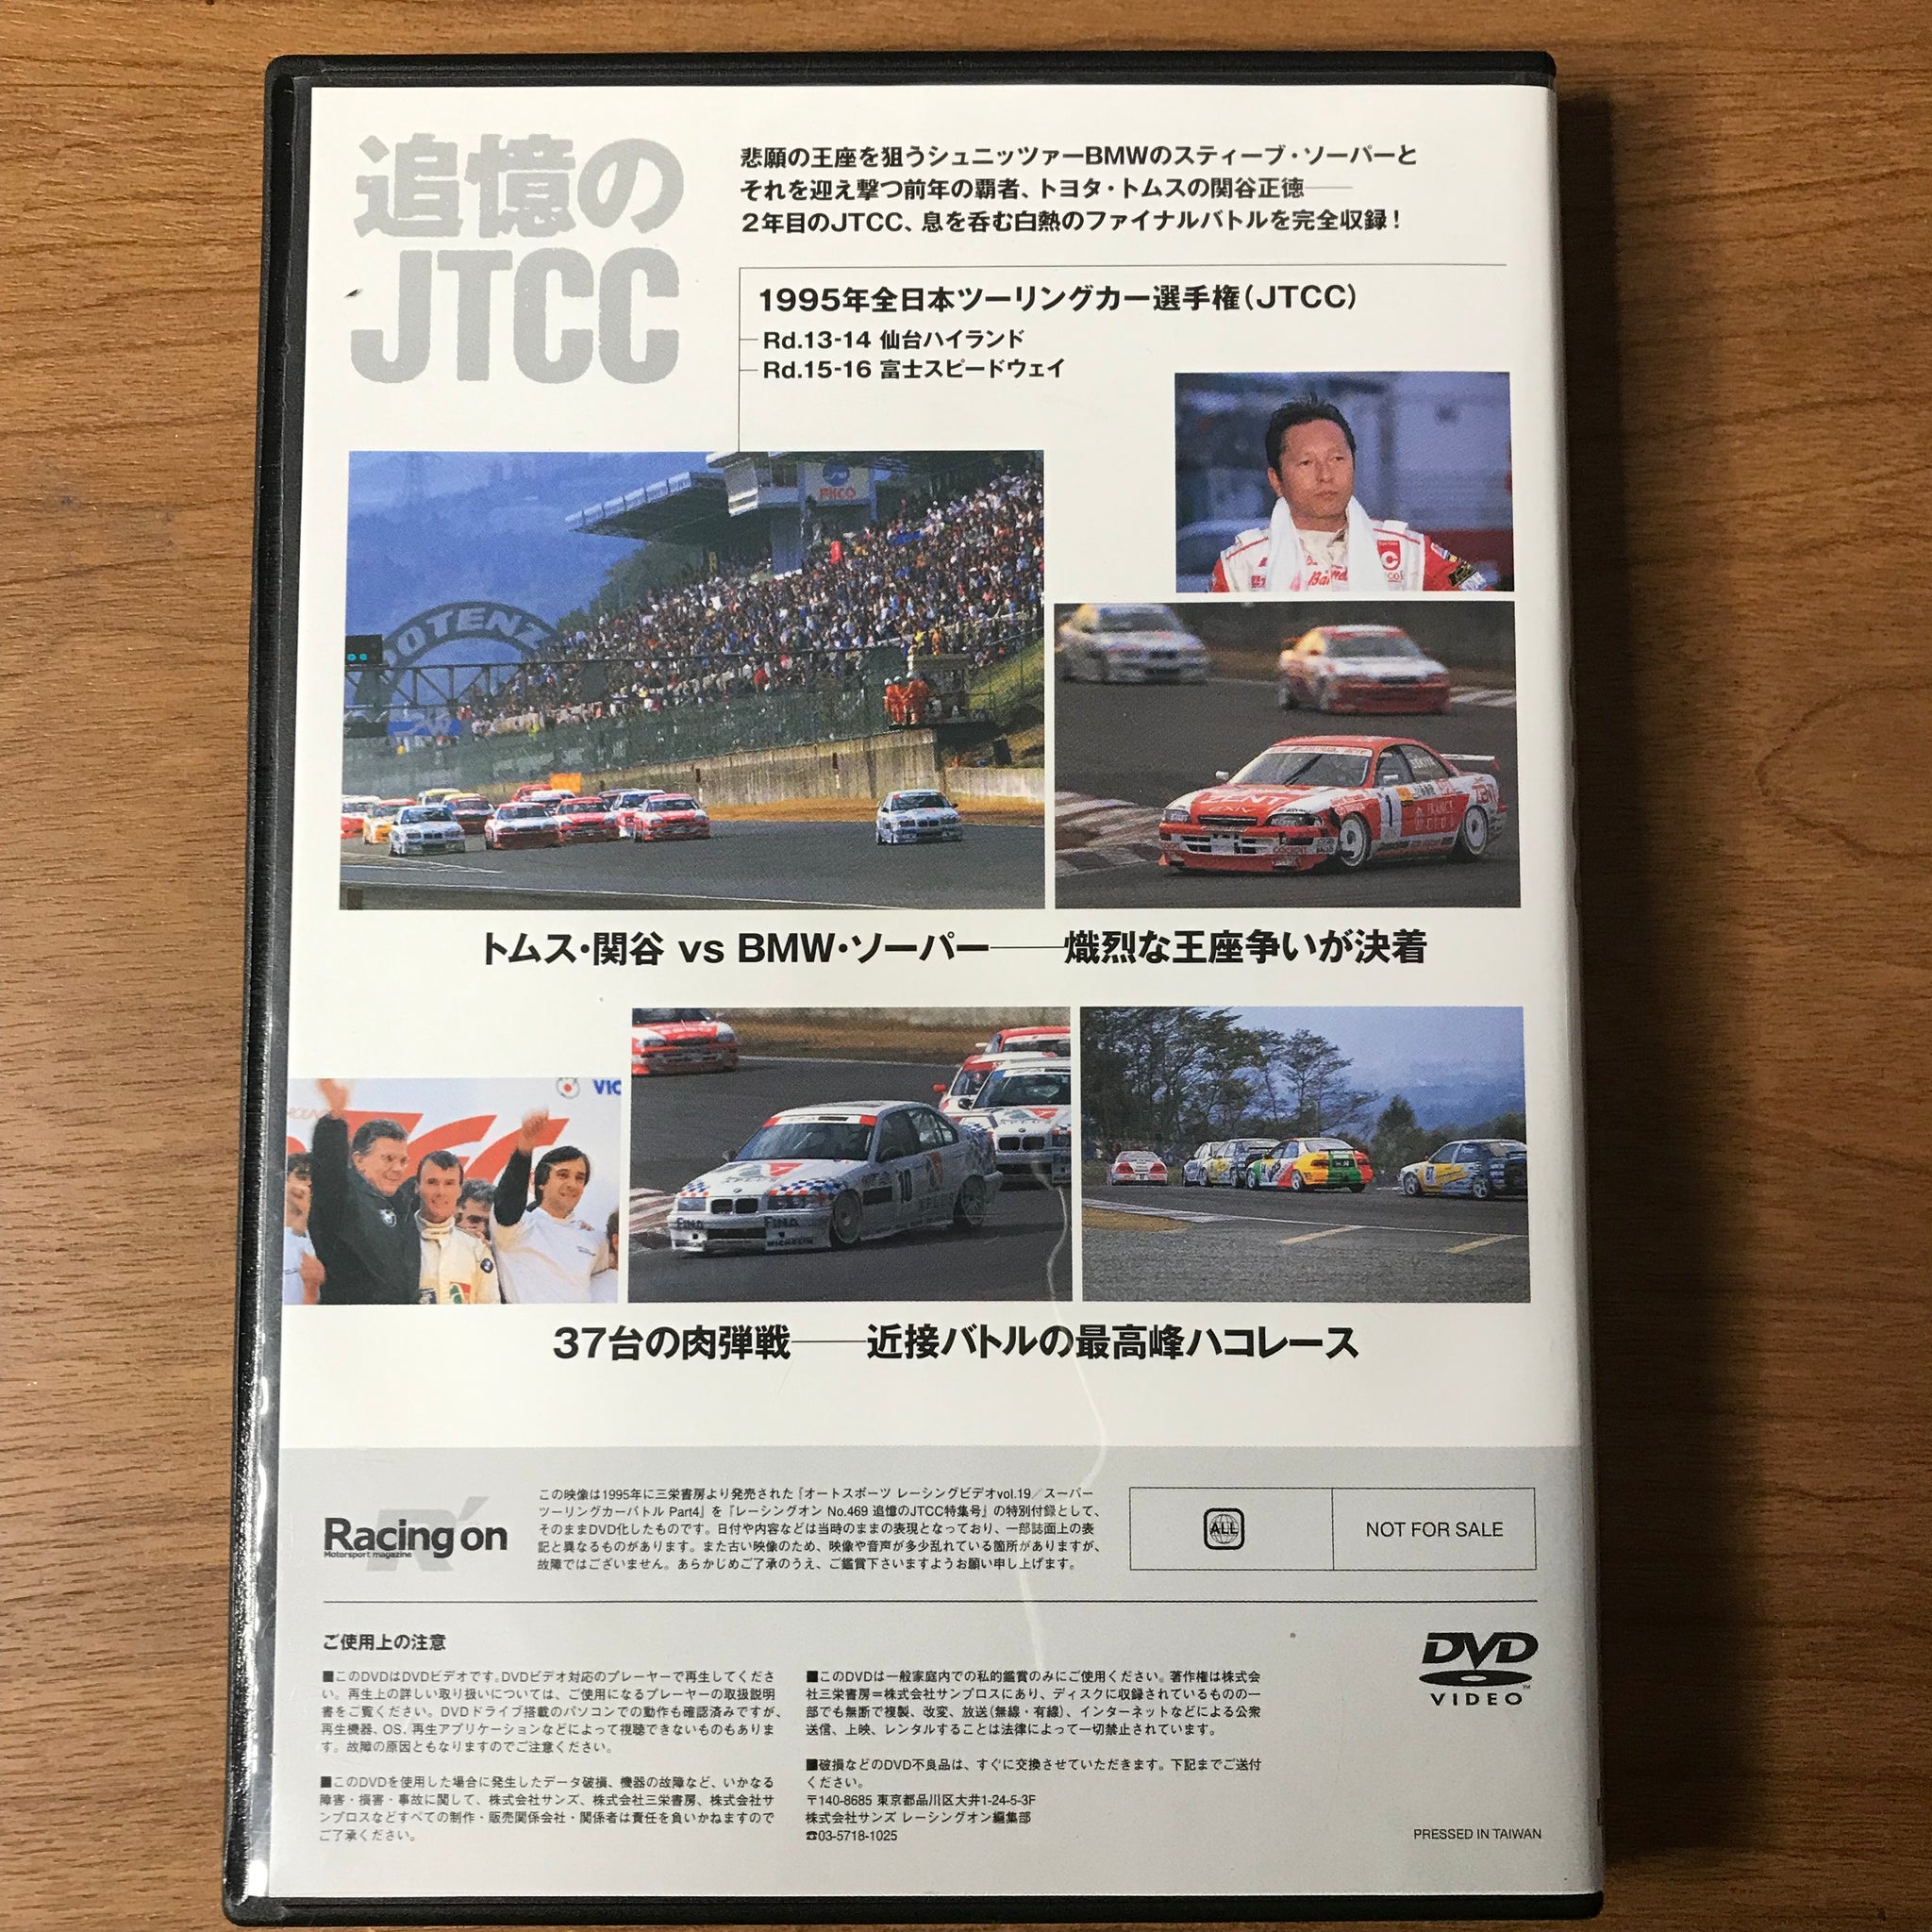 Racing On Special DVD - Remembering JTCC 1995 Rounds13-16